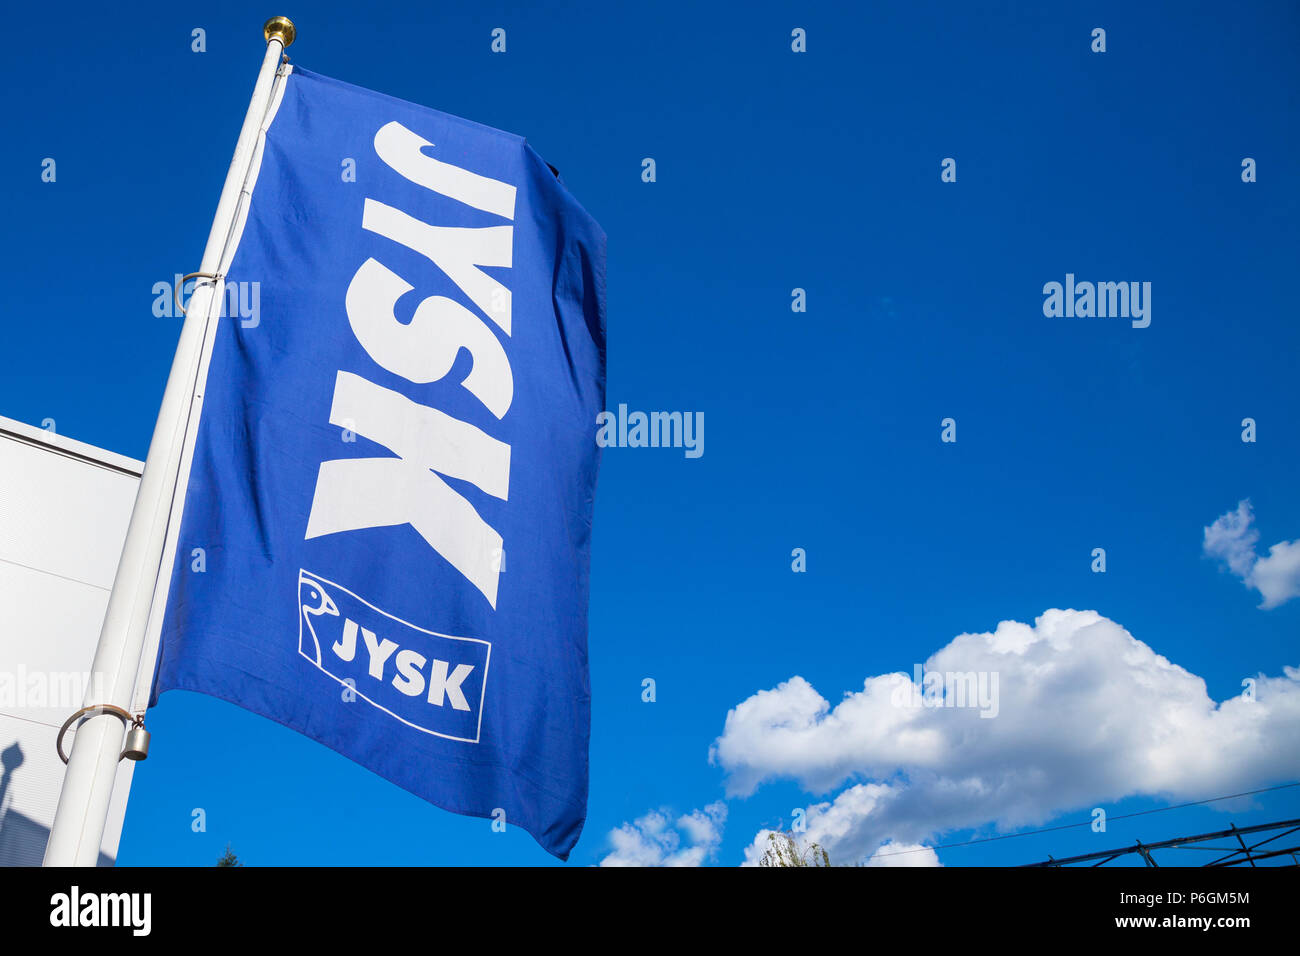 Jysk Sign High Resolution Stock Photography and Images - Alamy